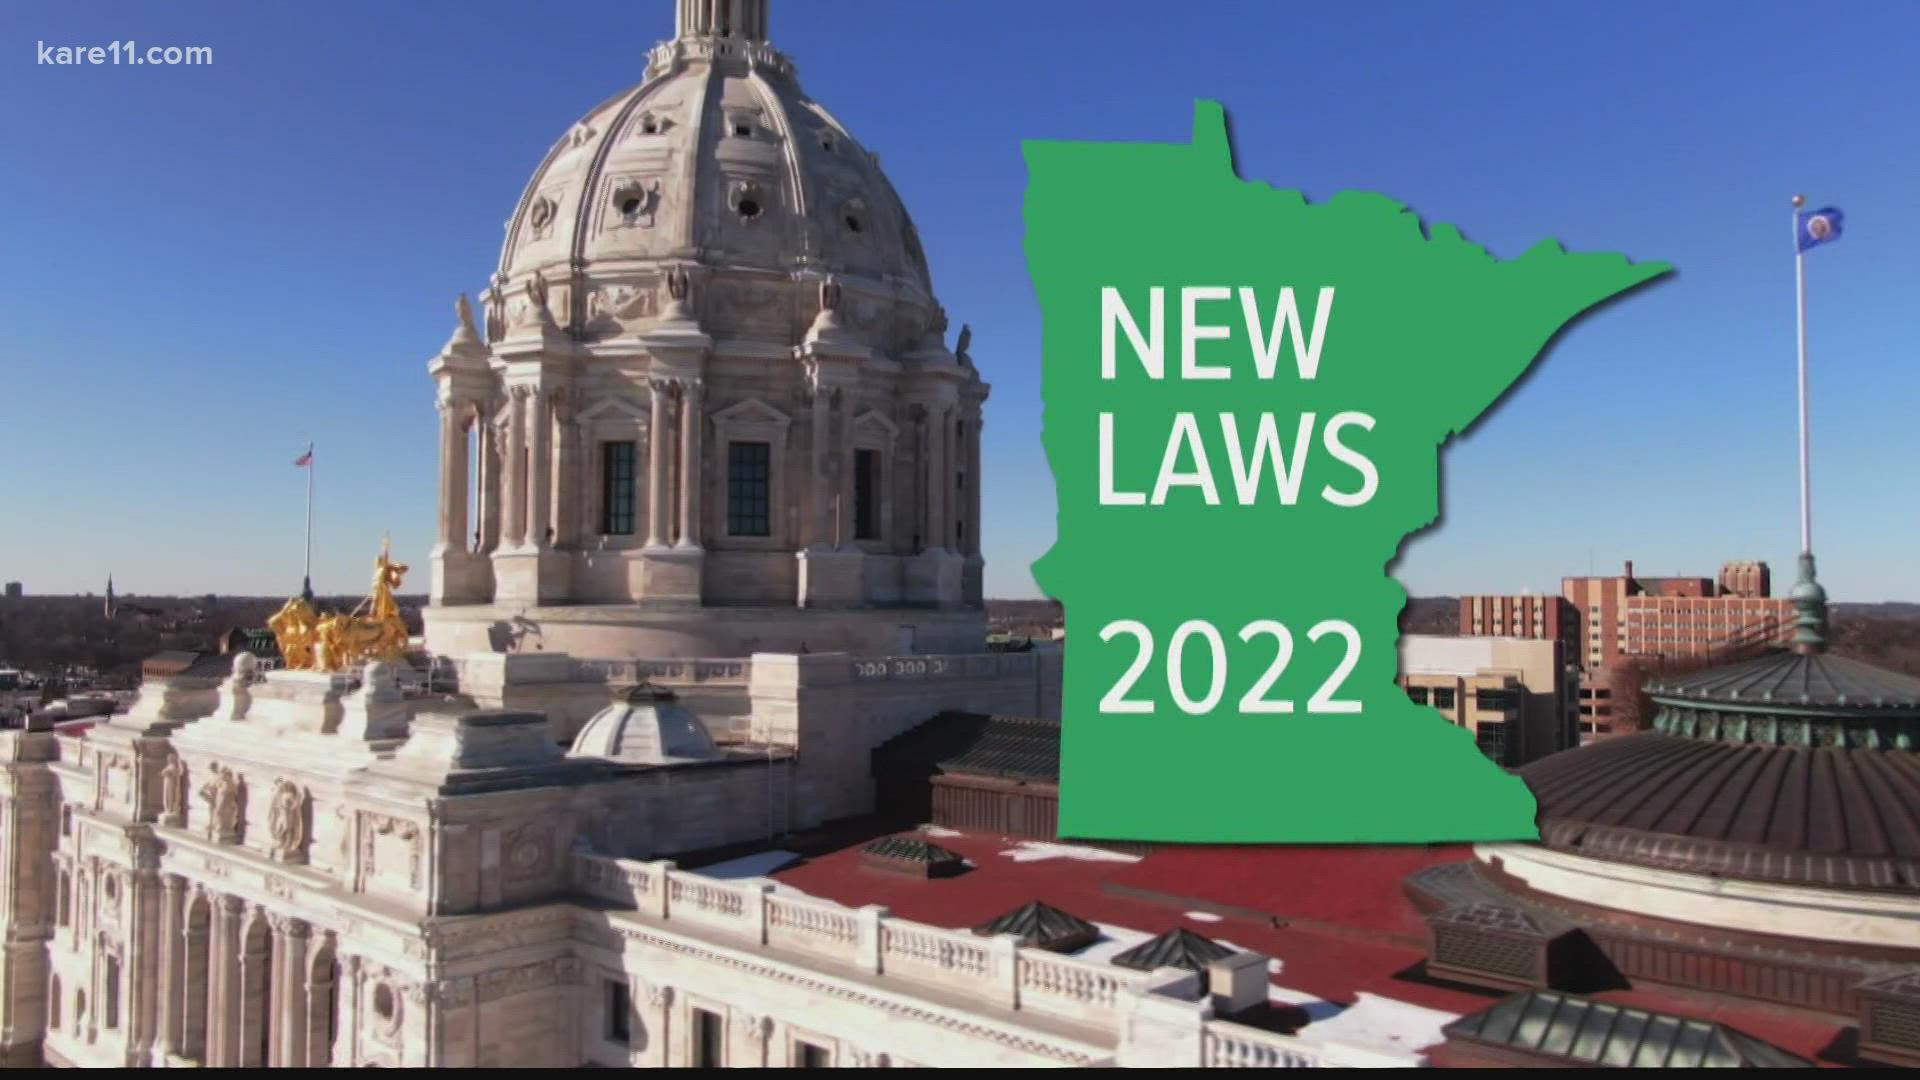 KARE 11's John Croman looks at some of the state's new laws that will go into effect in 2022.